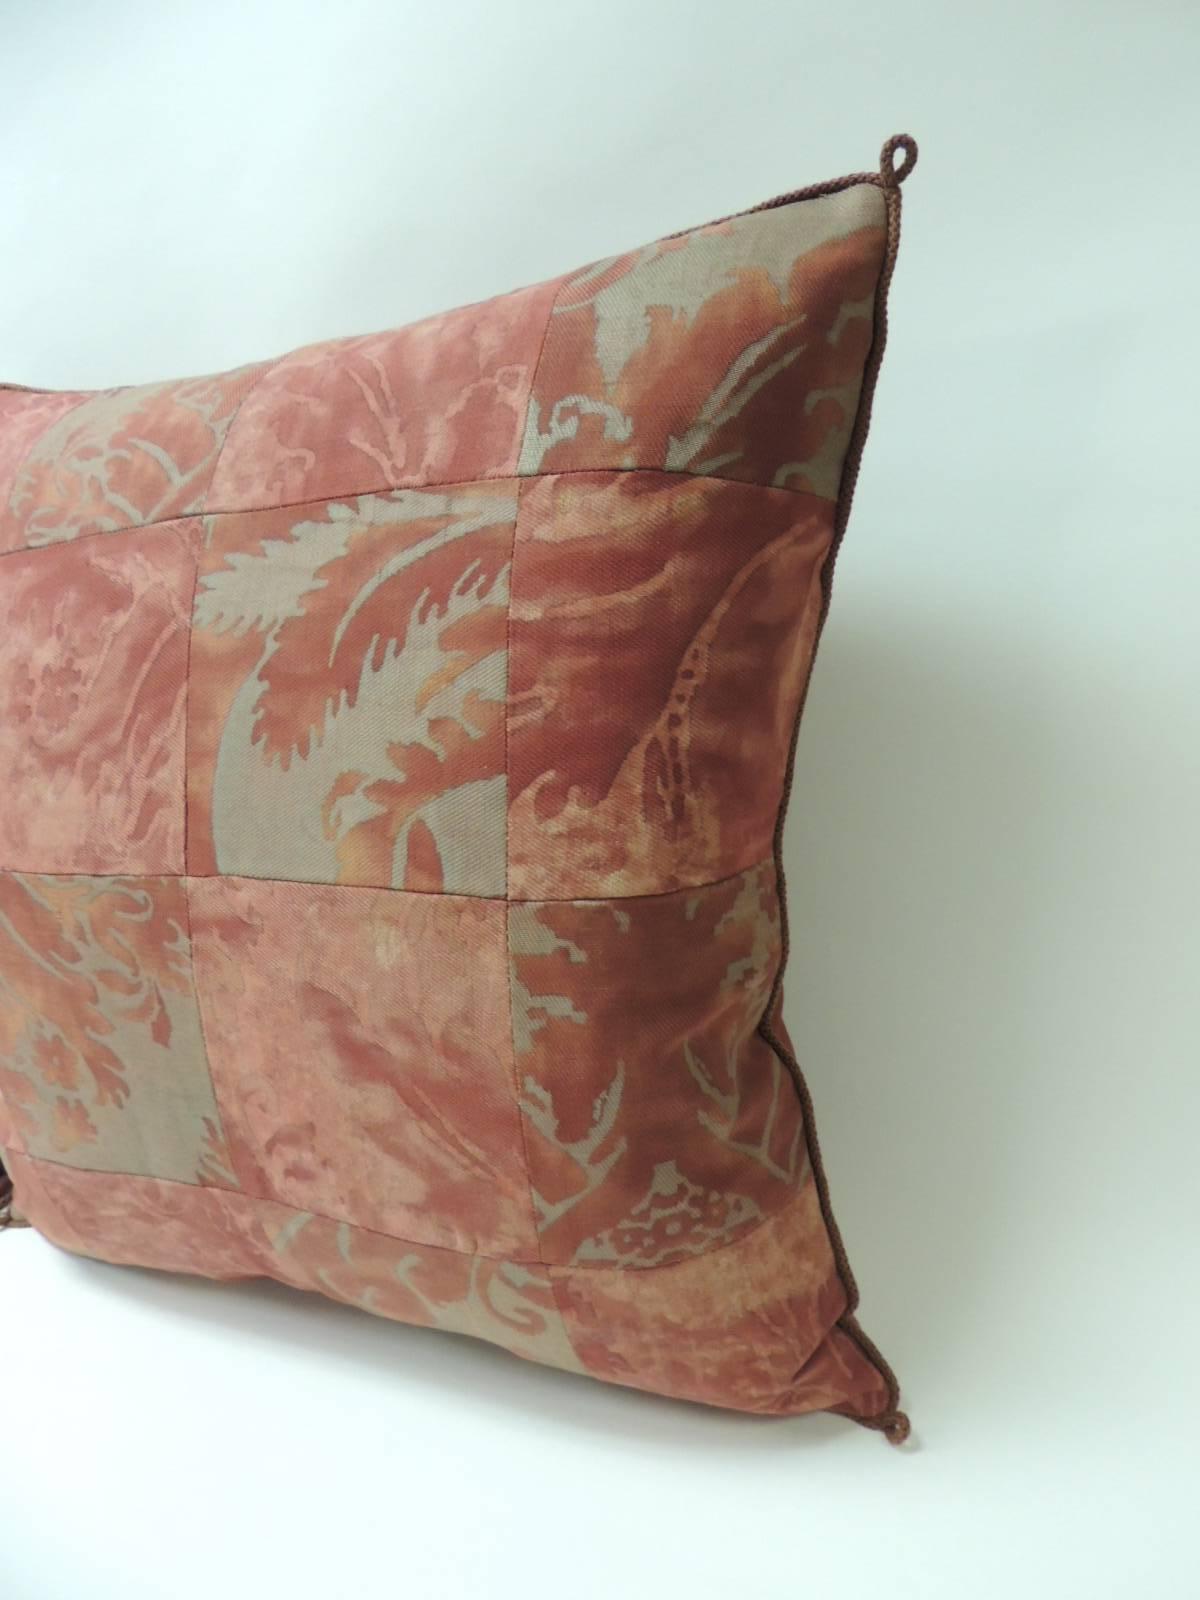 Pair of vintage patchwork fortuny “Glicine” pattern red and silvery decorative pillows
Pair of vintage fortuny “Glicine” pattern red and silvery decorative square pillows.
Large squares of textiles using them as a patchwork pattern using front and